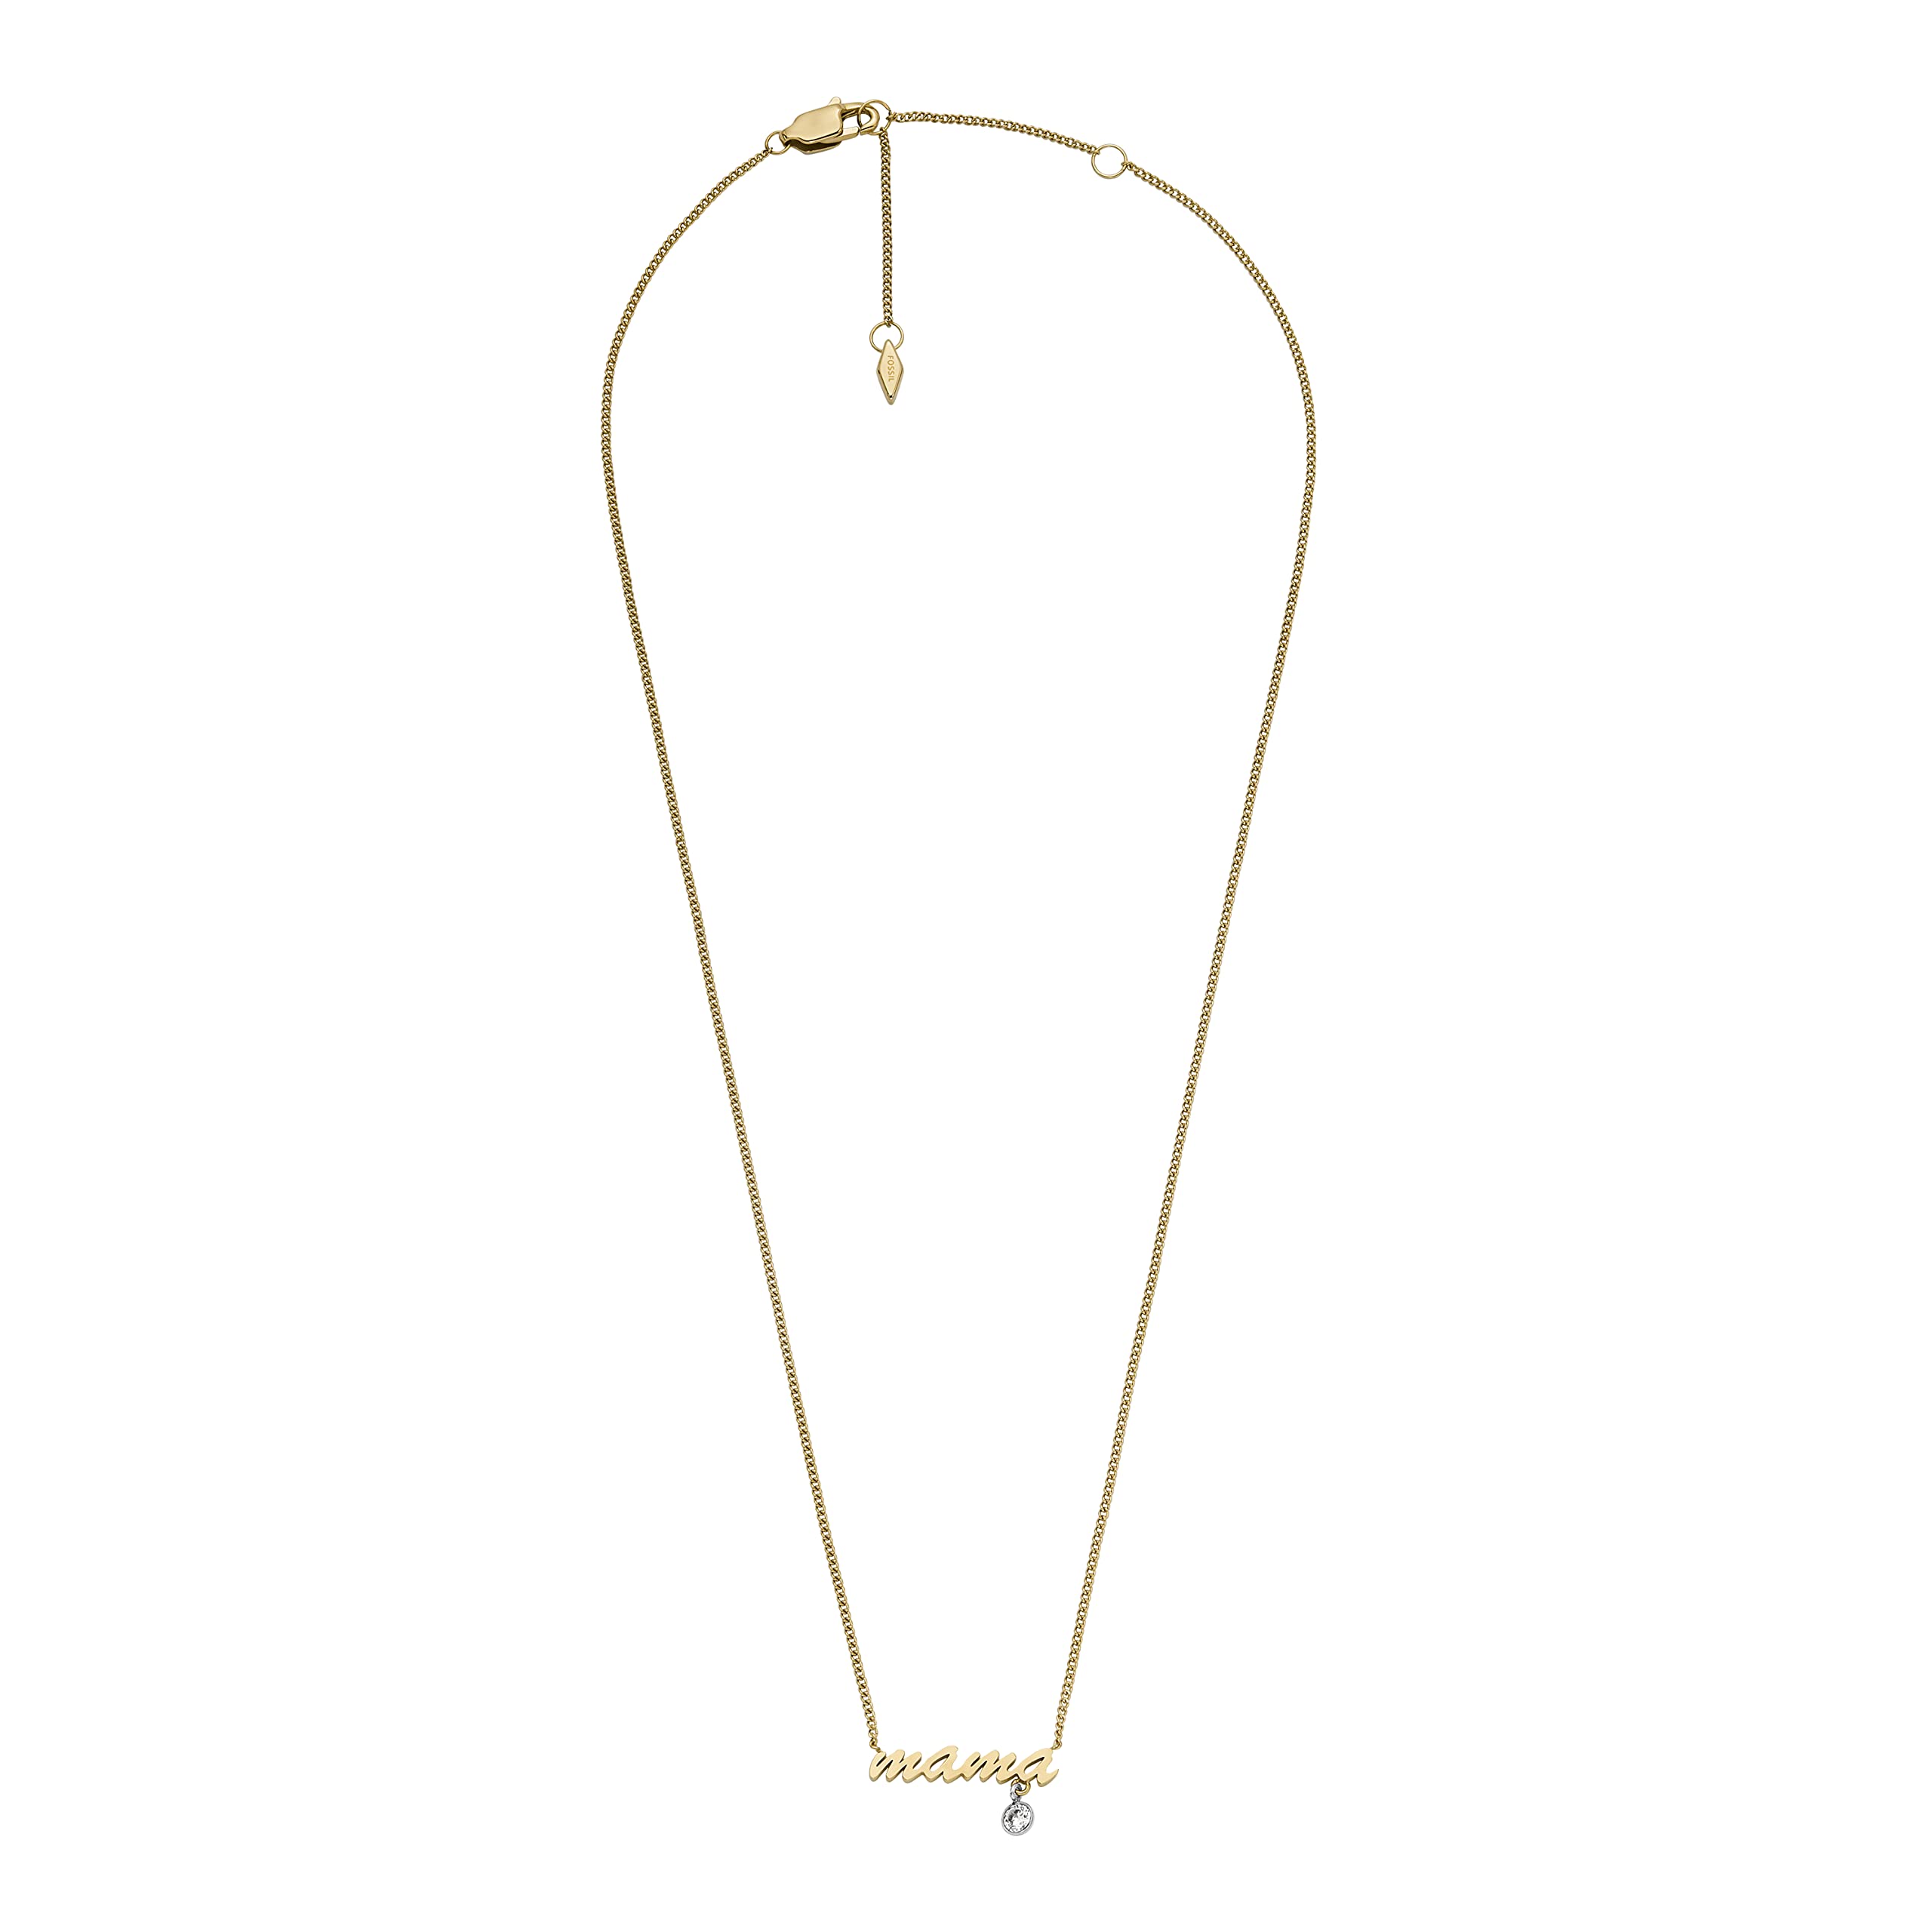 Fossil Women's Gold-Tone Stainless Steel Pendant Chain Necklace for Women